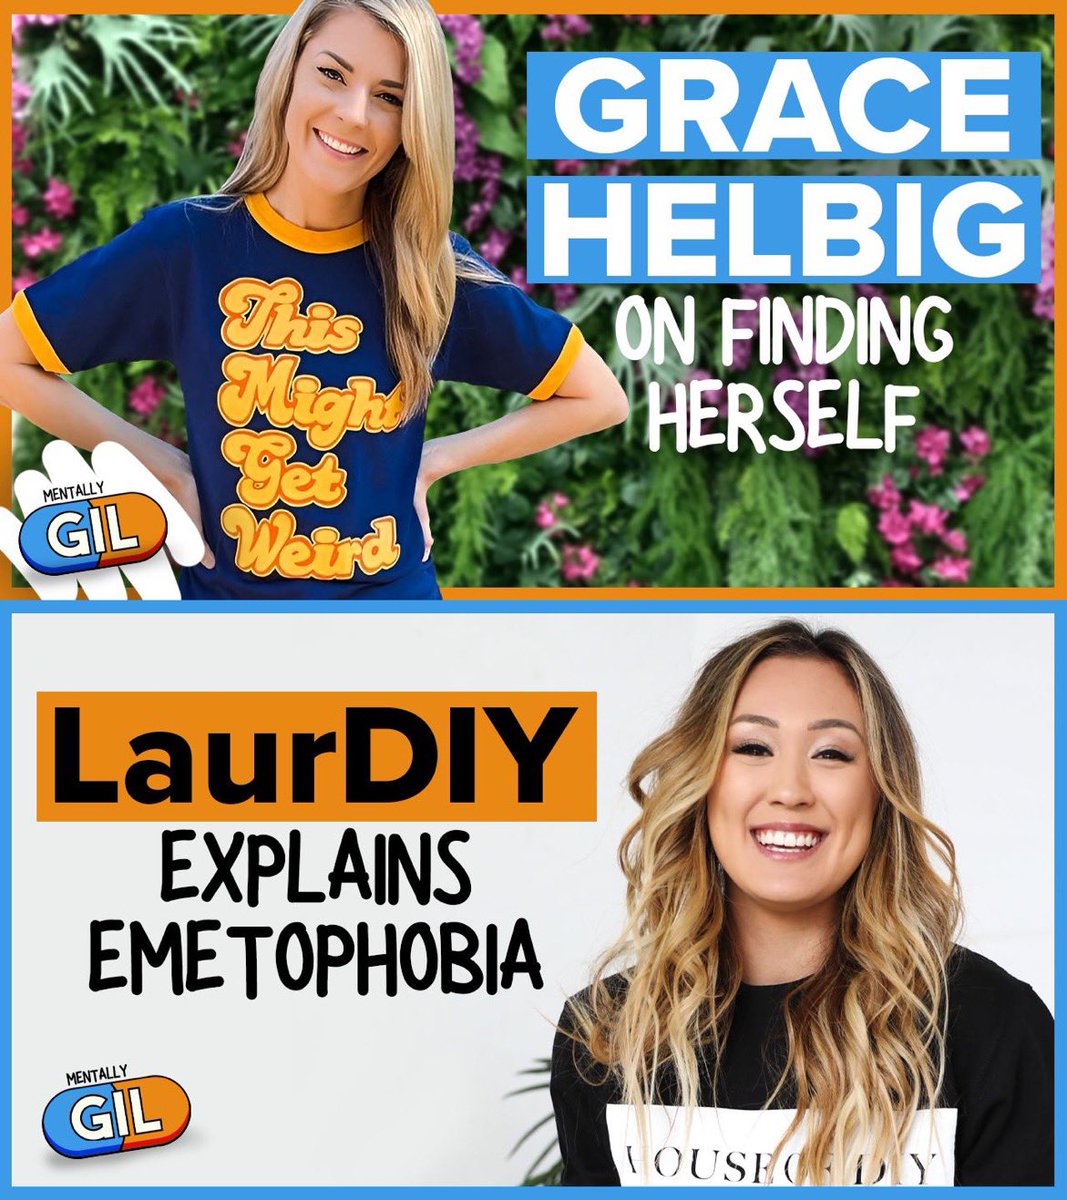 The first two episodes of “Mentally Gil: Conversations with Creators” are out now wherever you listen to podcasts! I interviewed @gracehelbig and @laurDIY about their anxiety. Link in bio!